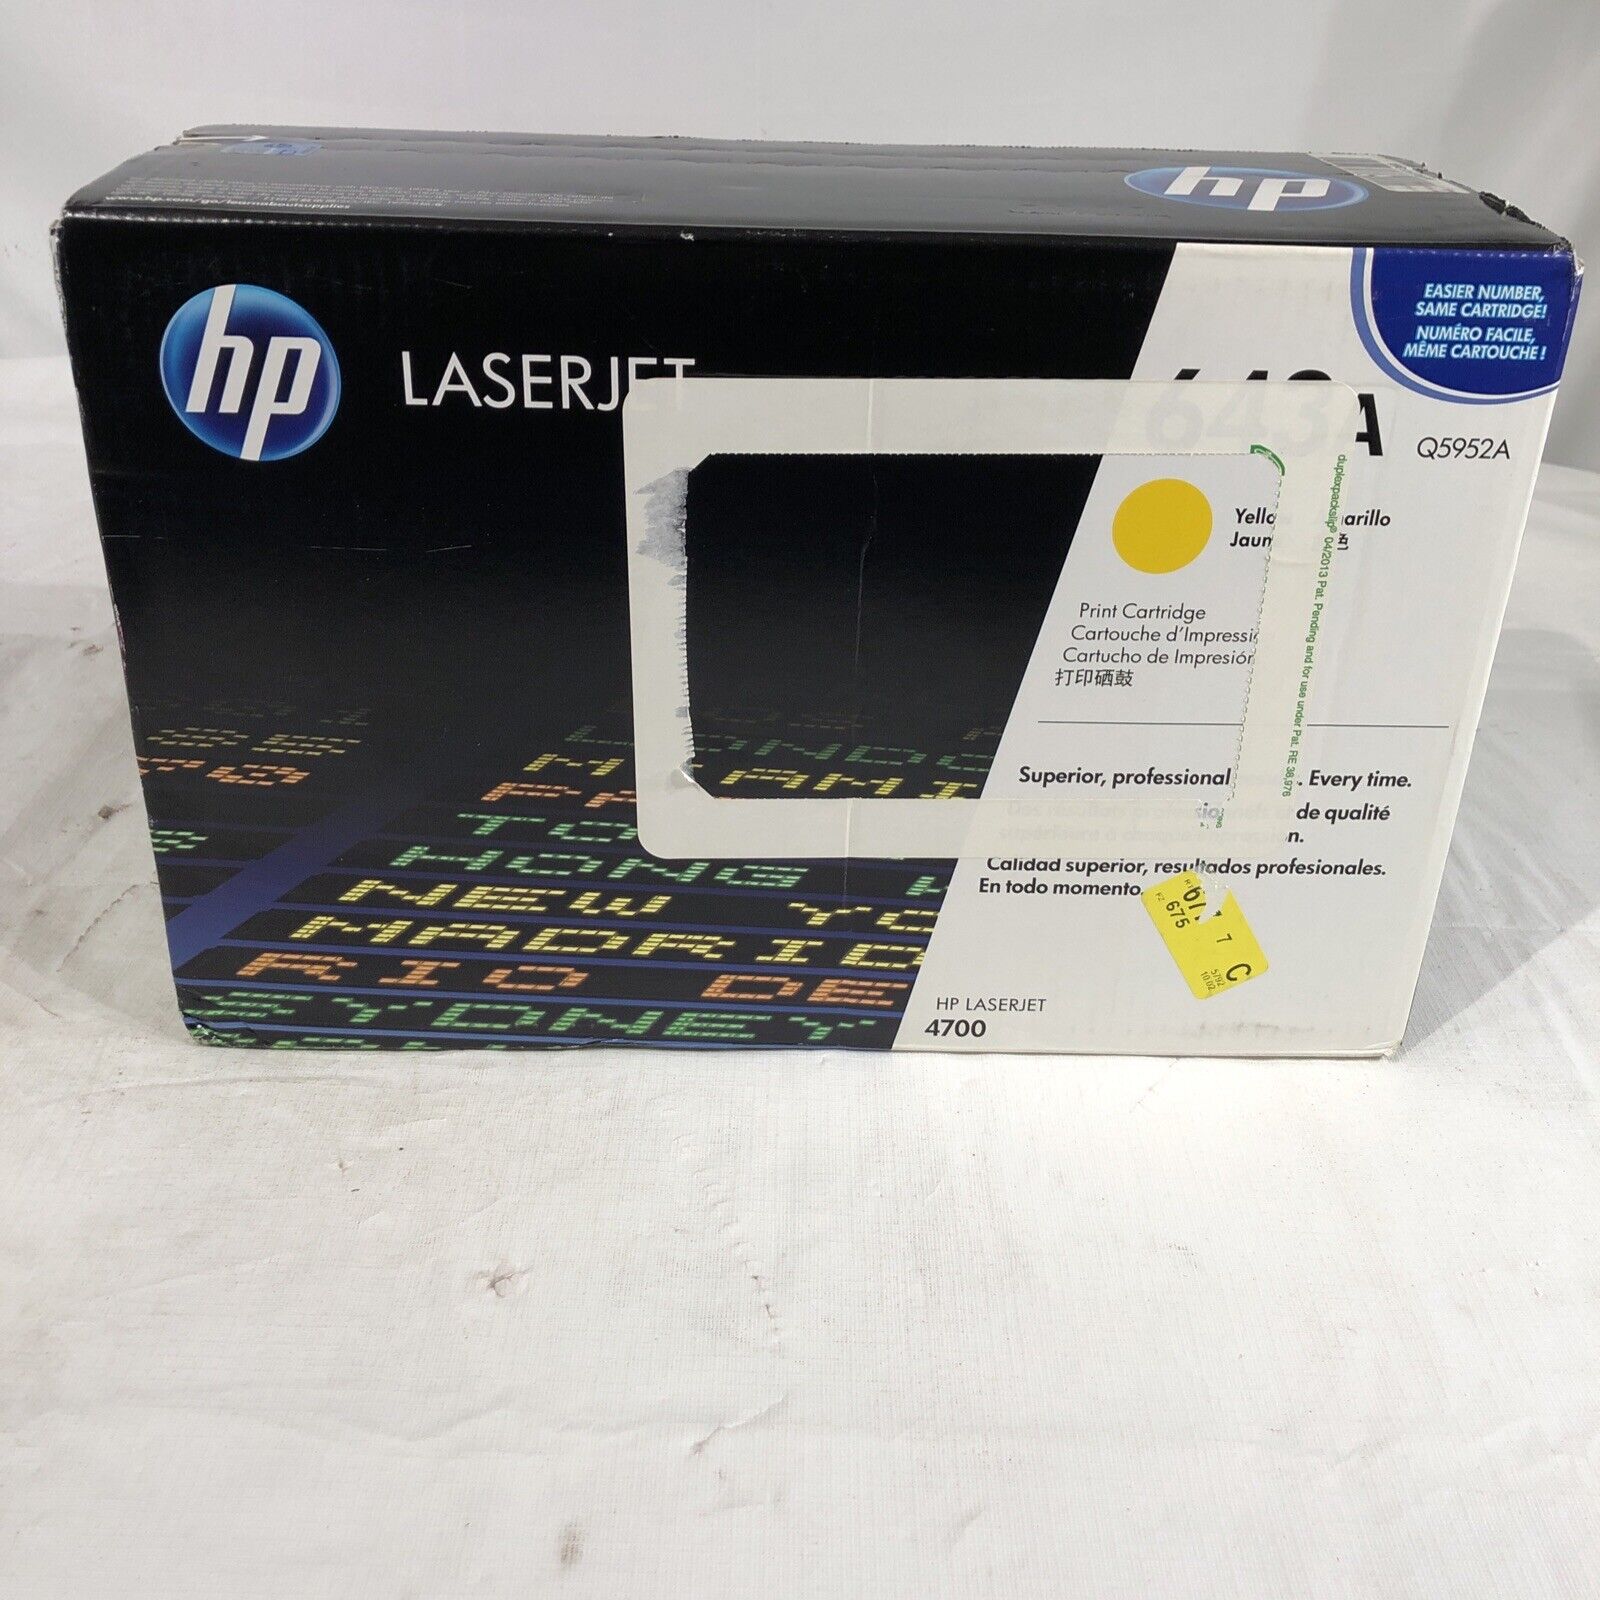 GENUINE HP 643A YELLOW Q5952A TONER CARTRIDGE FOR LASERJET 4700 NT-24